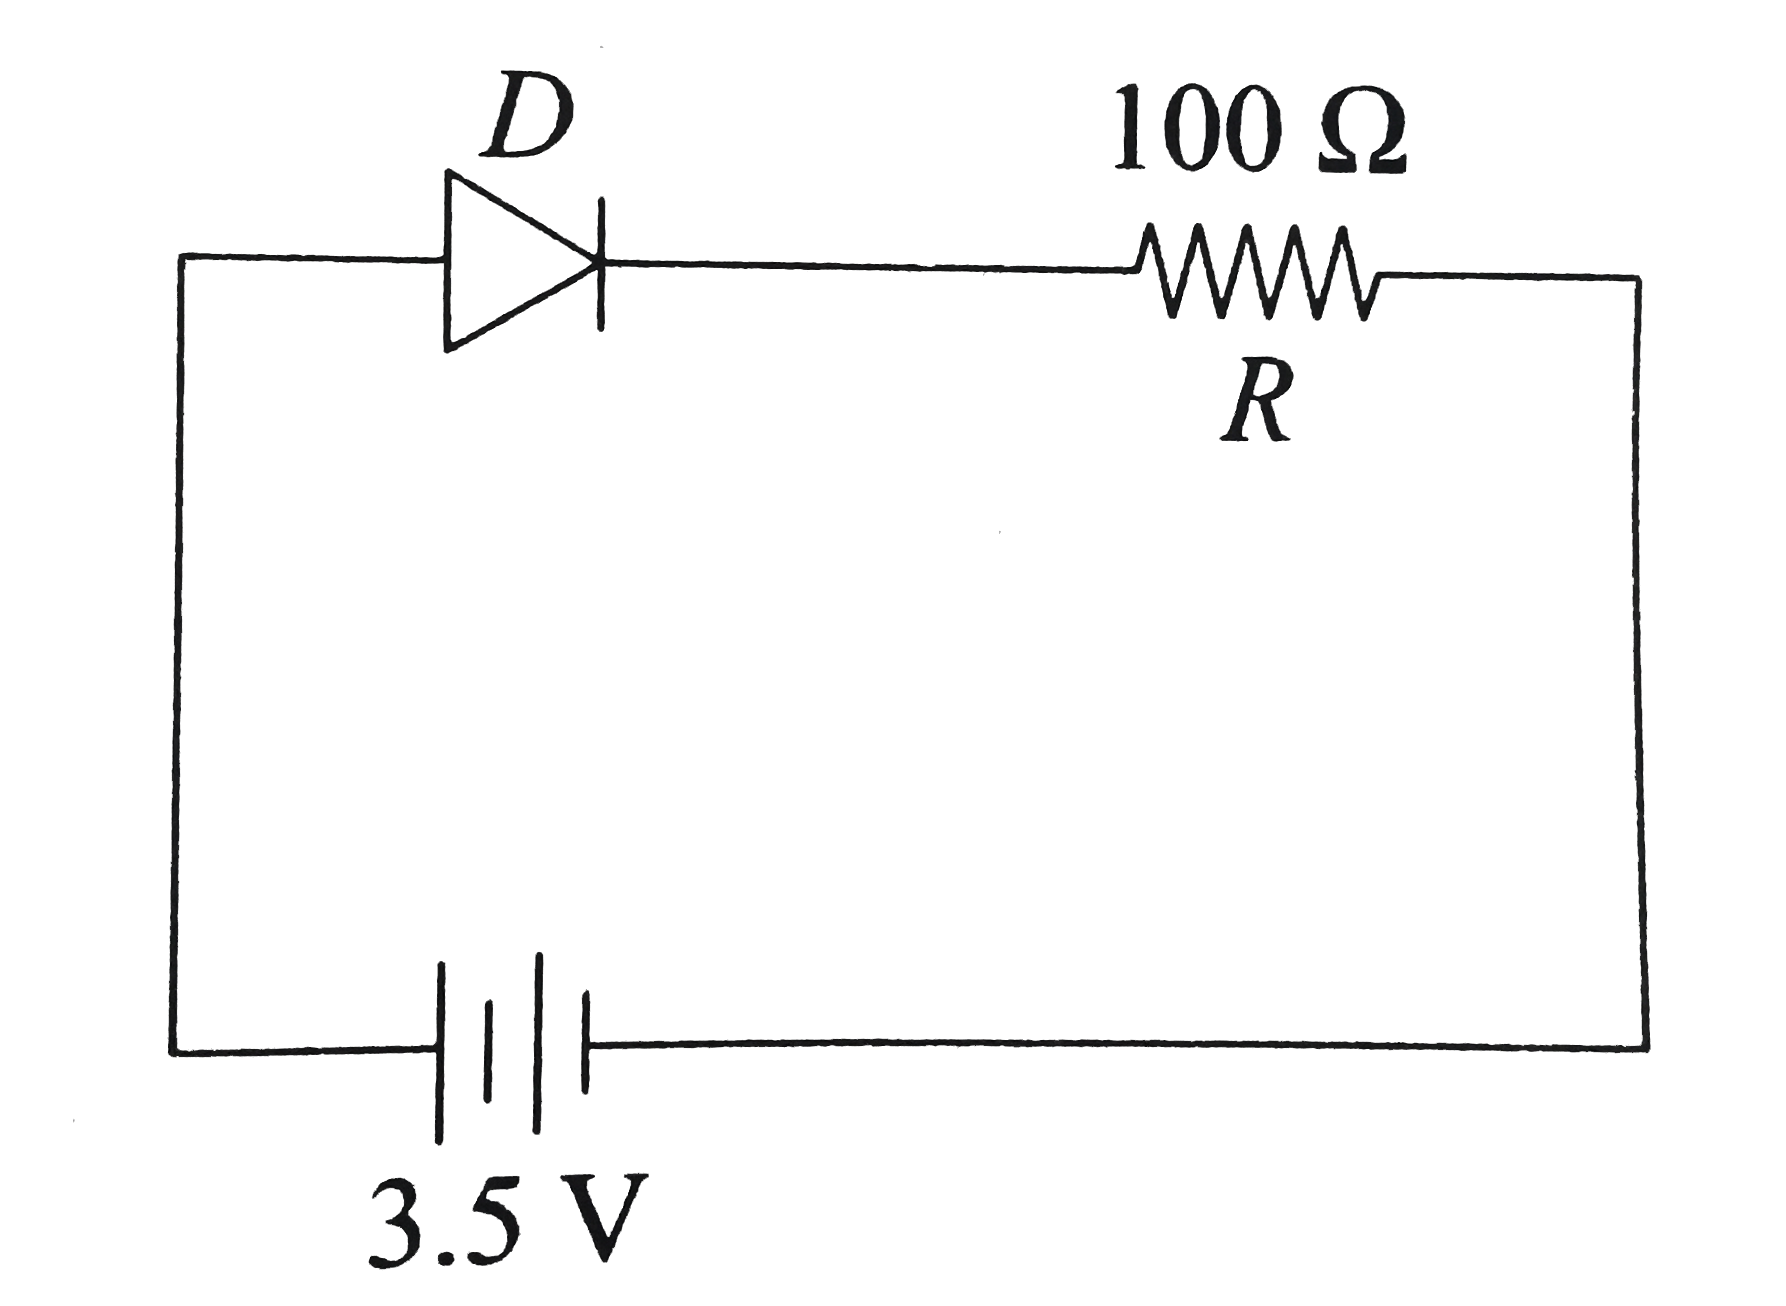 In the given figure, a diode D is connected to an external resistance R=100 Omega and an emf of 3.5 V. If the barrier potential developed across the diode is 0.5 V, the current in the circuit will be :